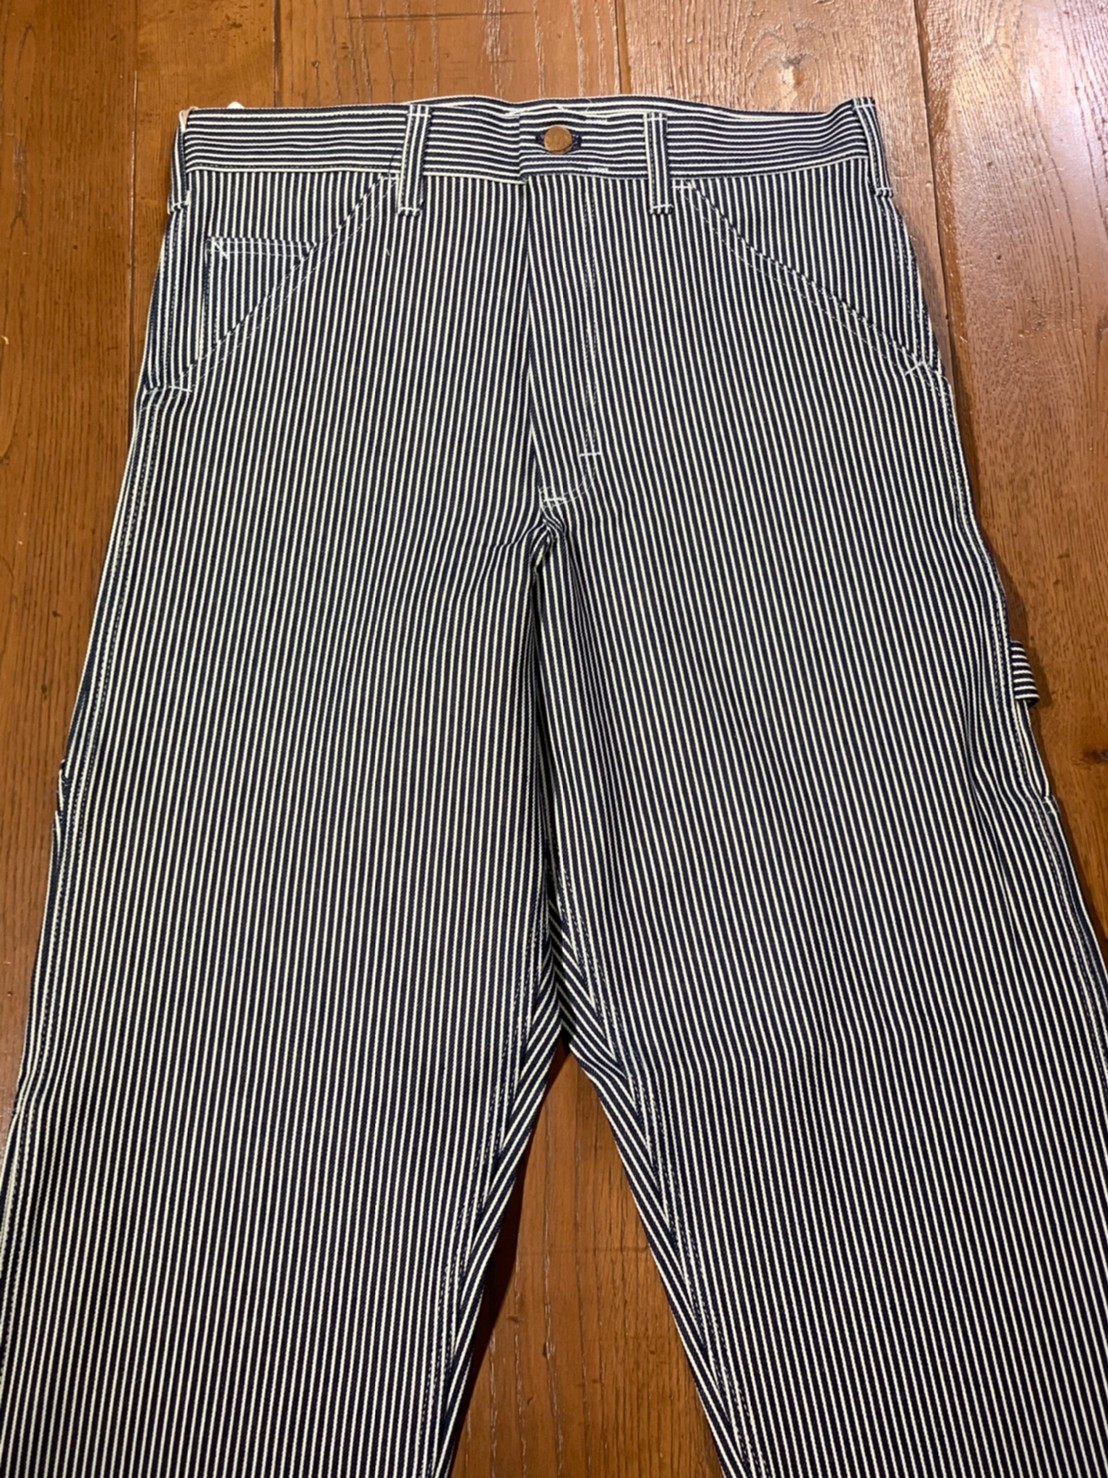 Hummingbirds'hill shop / SMITH'S PAINTER PANTS MADE IN USA Dead stock ...